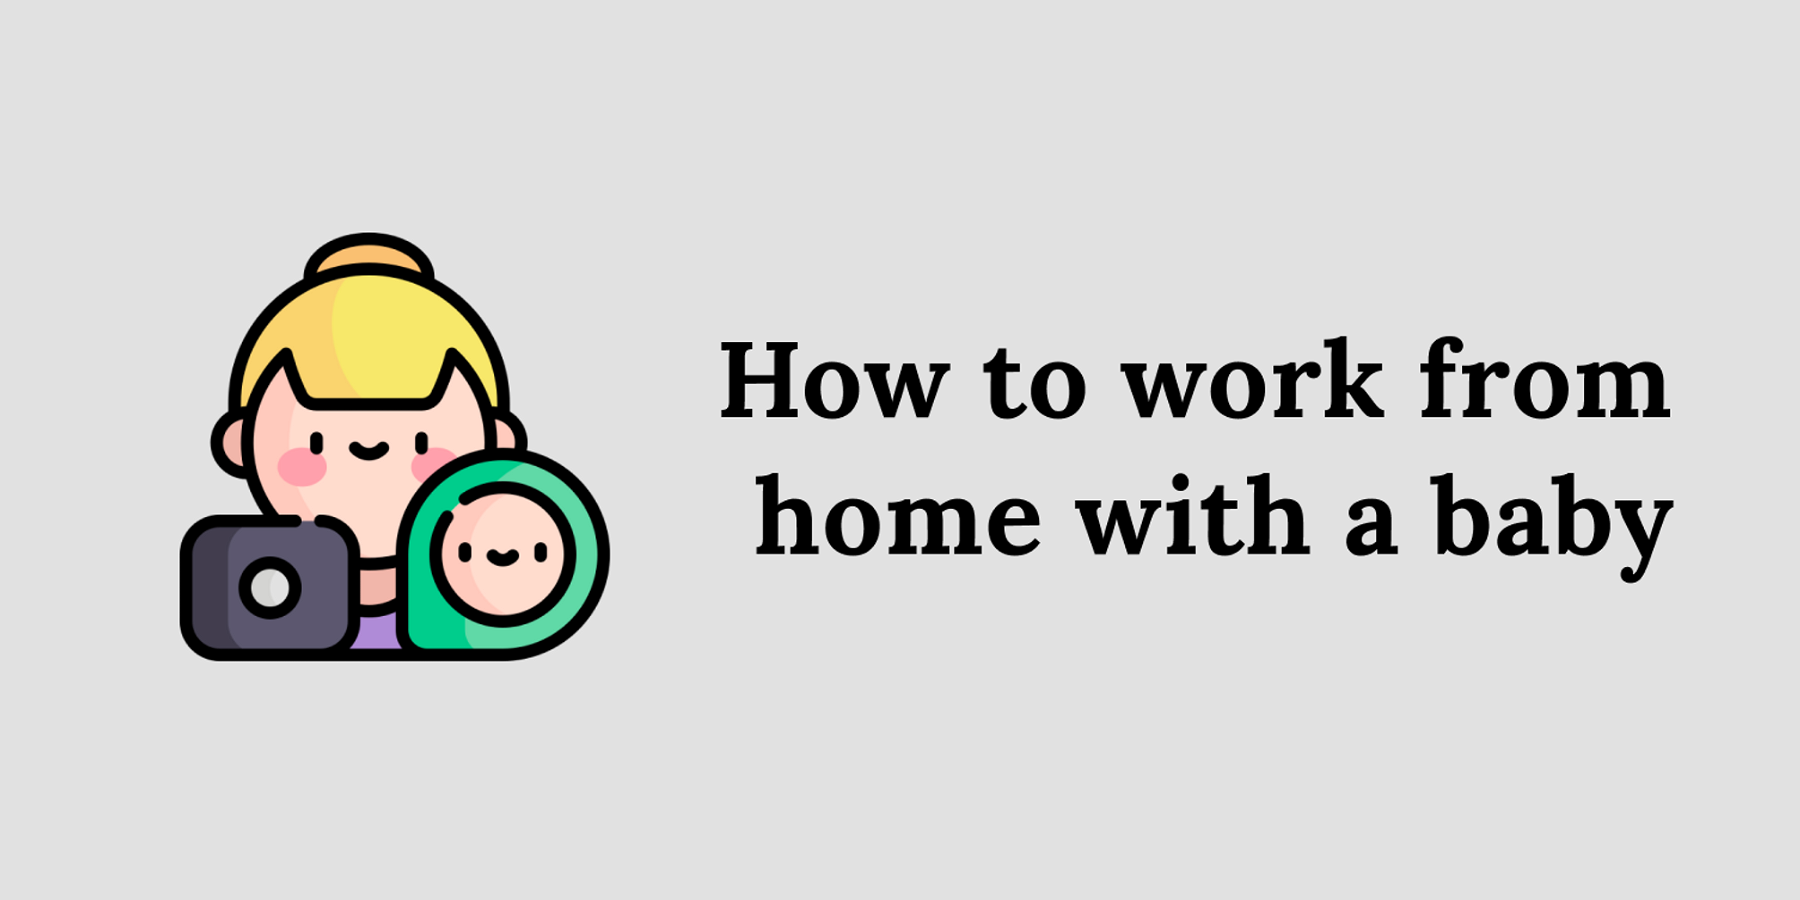 How to work from home with a baby